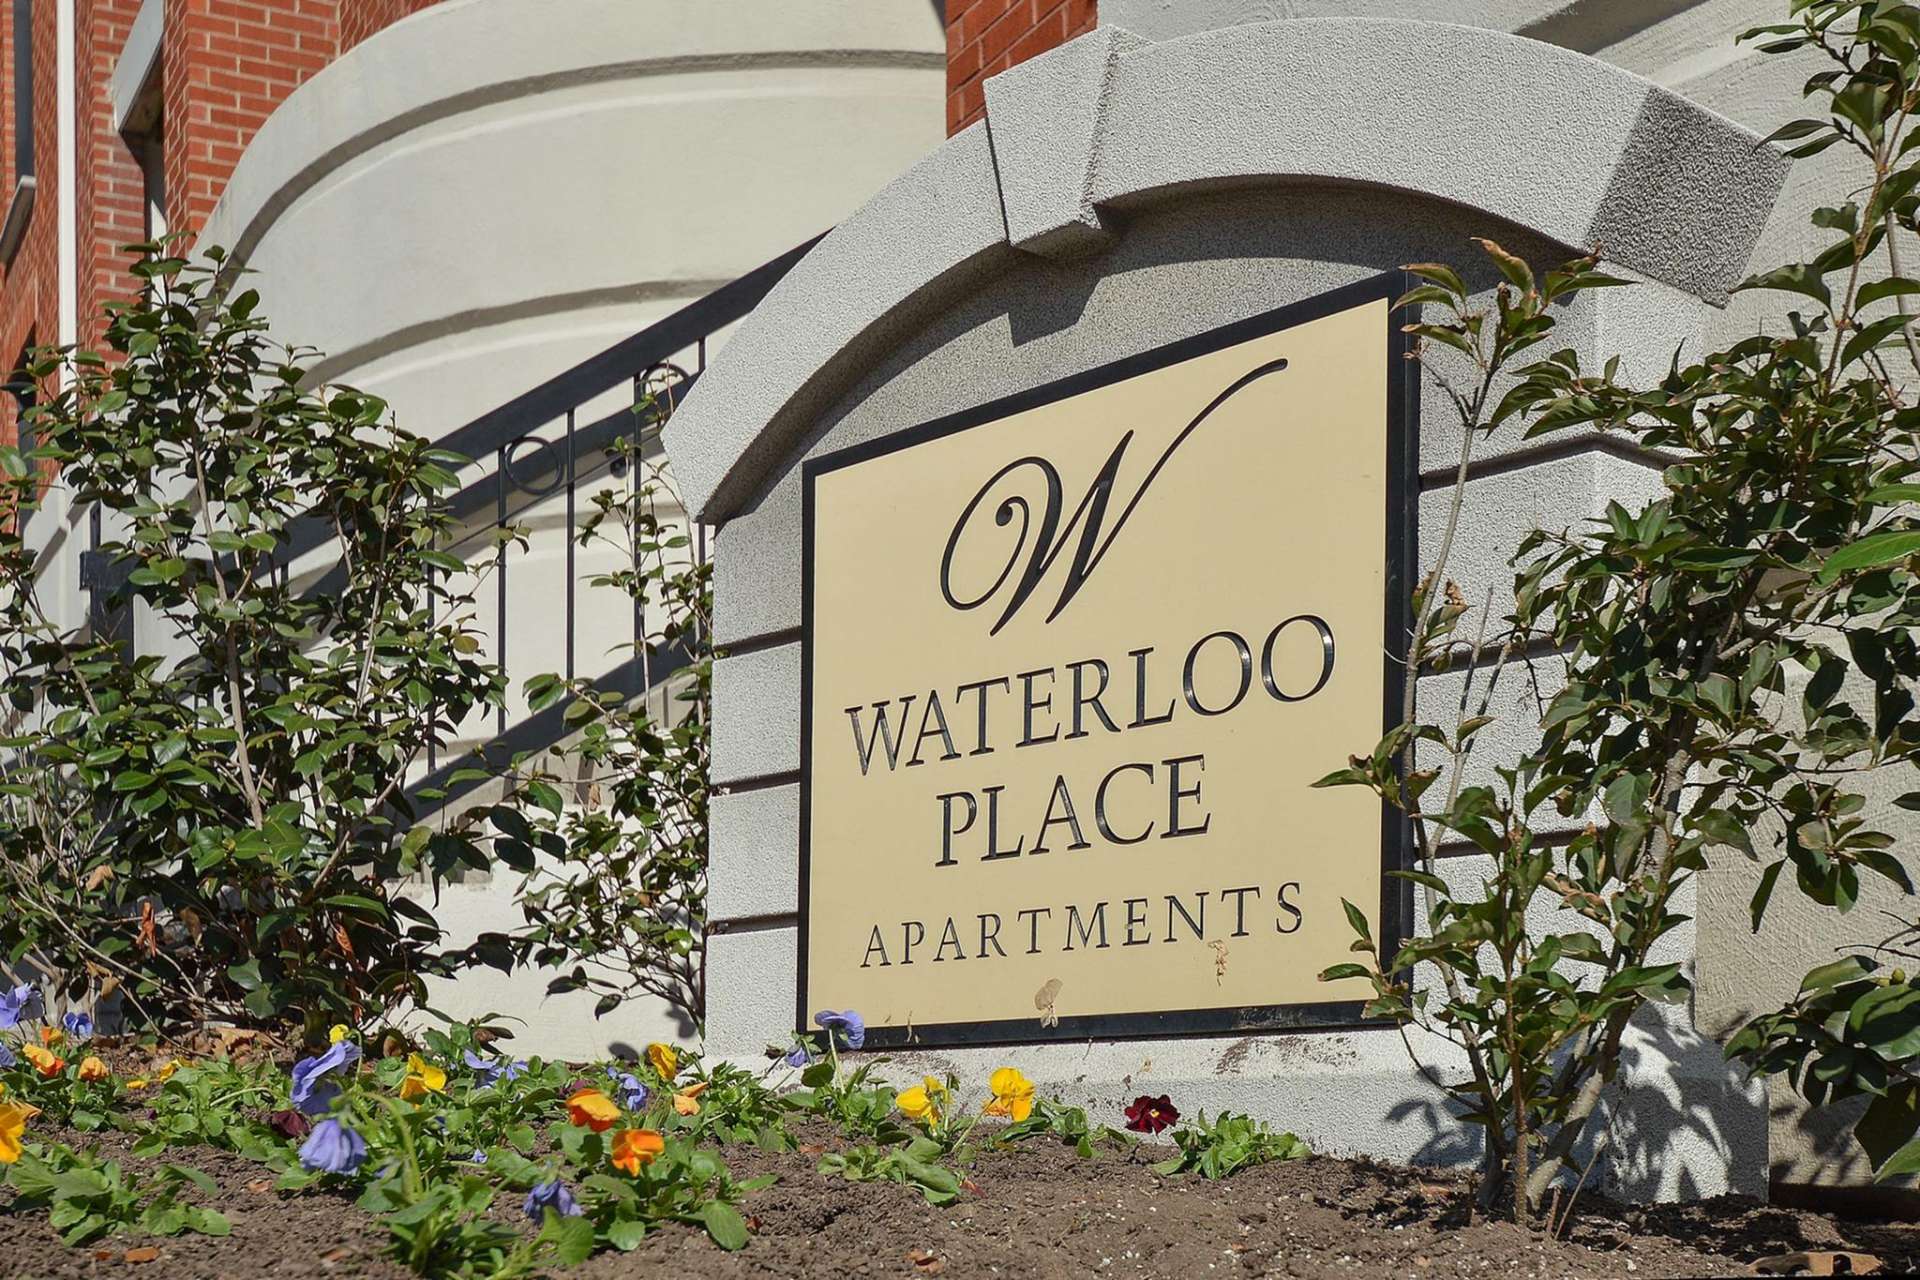 Waterloo Place Apartments signage